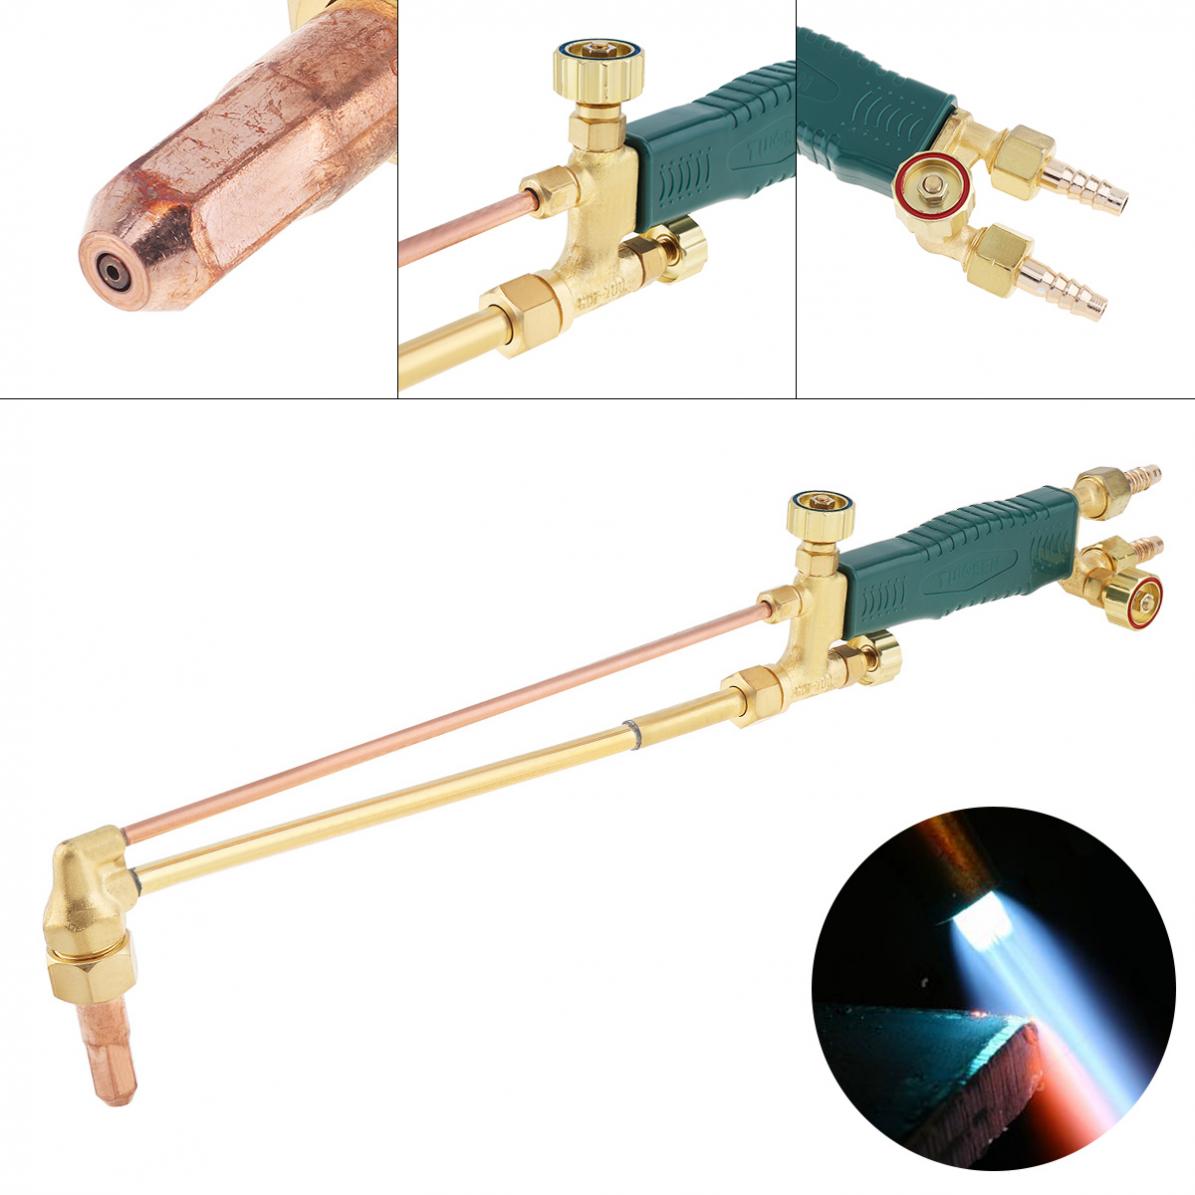 Gas Welding Gun Copper Shot Suction Torch with Copper Cutting Nozzle Support Oxygen Acetylene Propane for Heating / Grilling